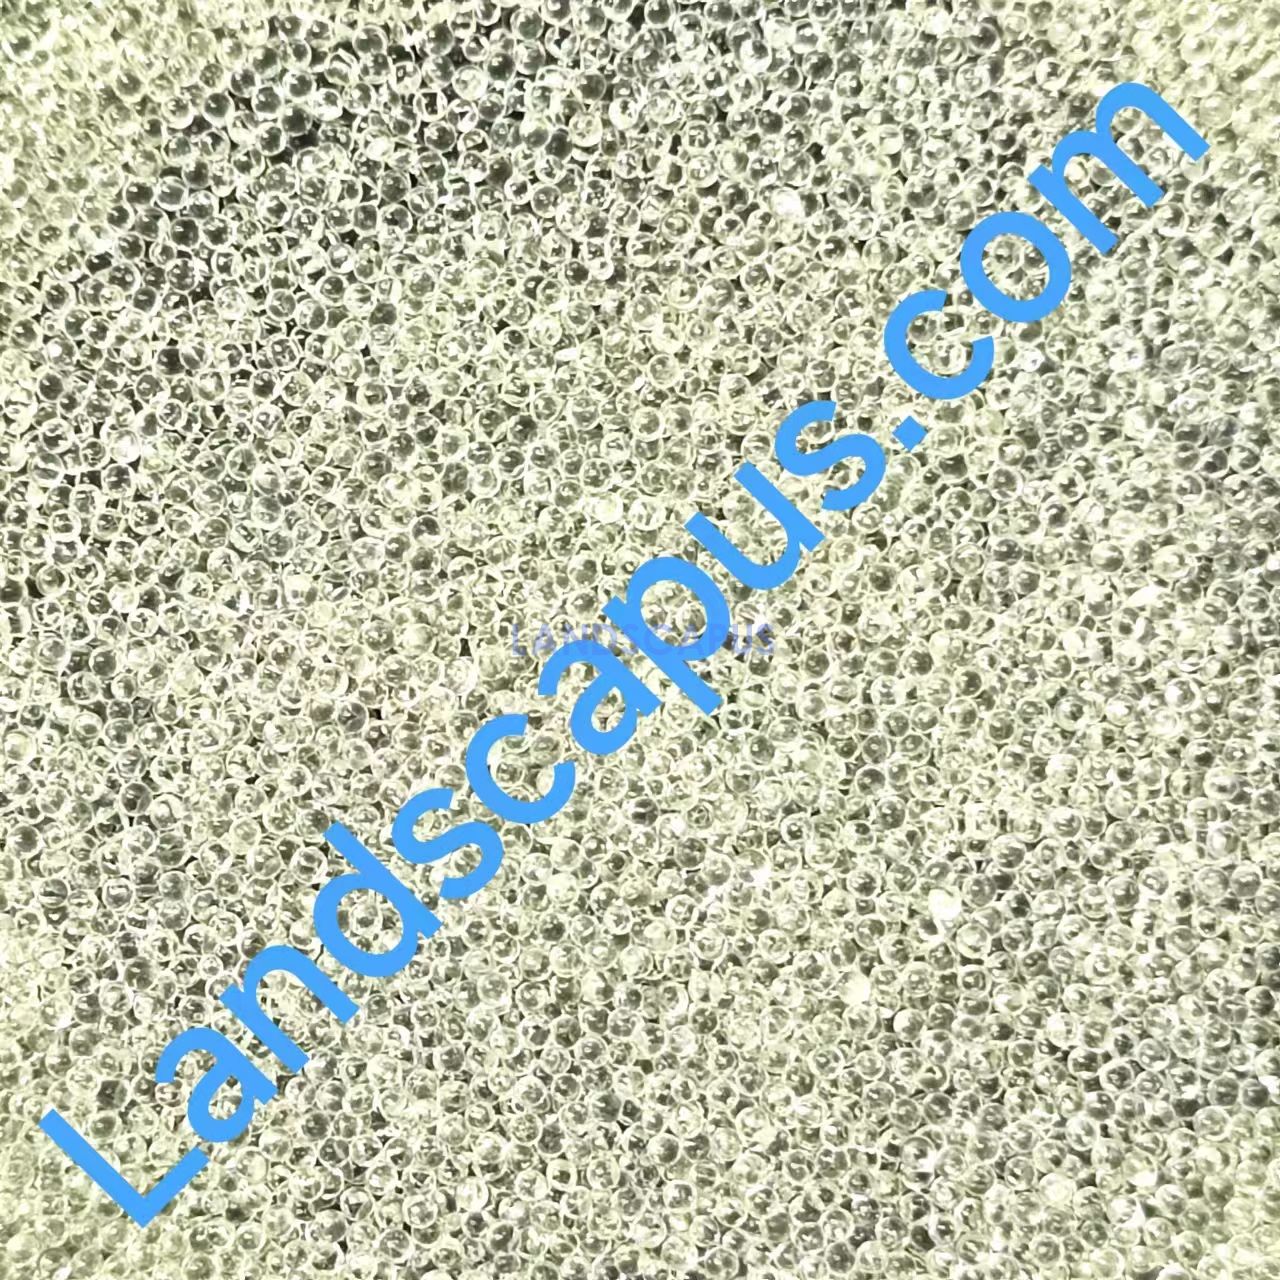 1.7 Index Road marking glass Microspheres Beads